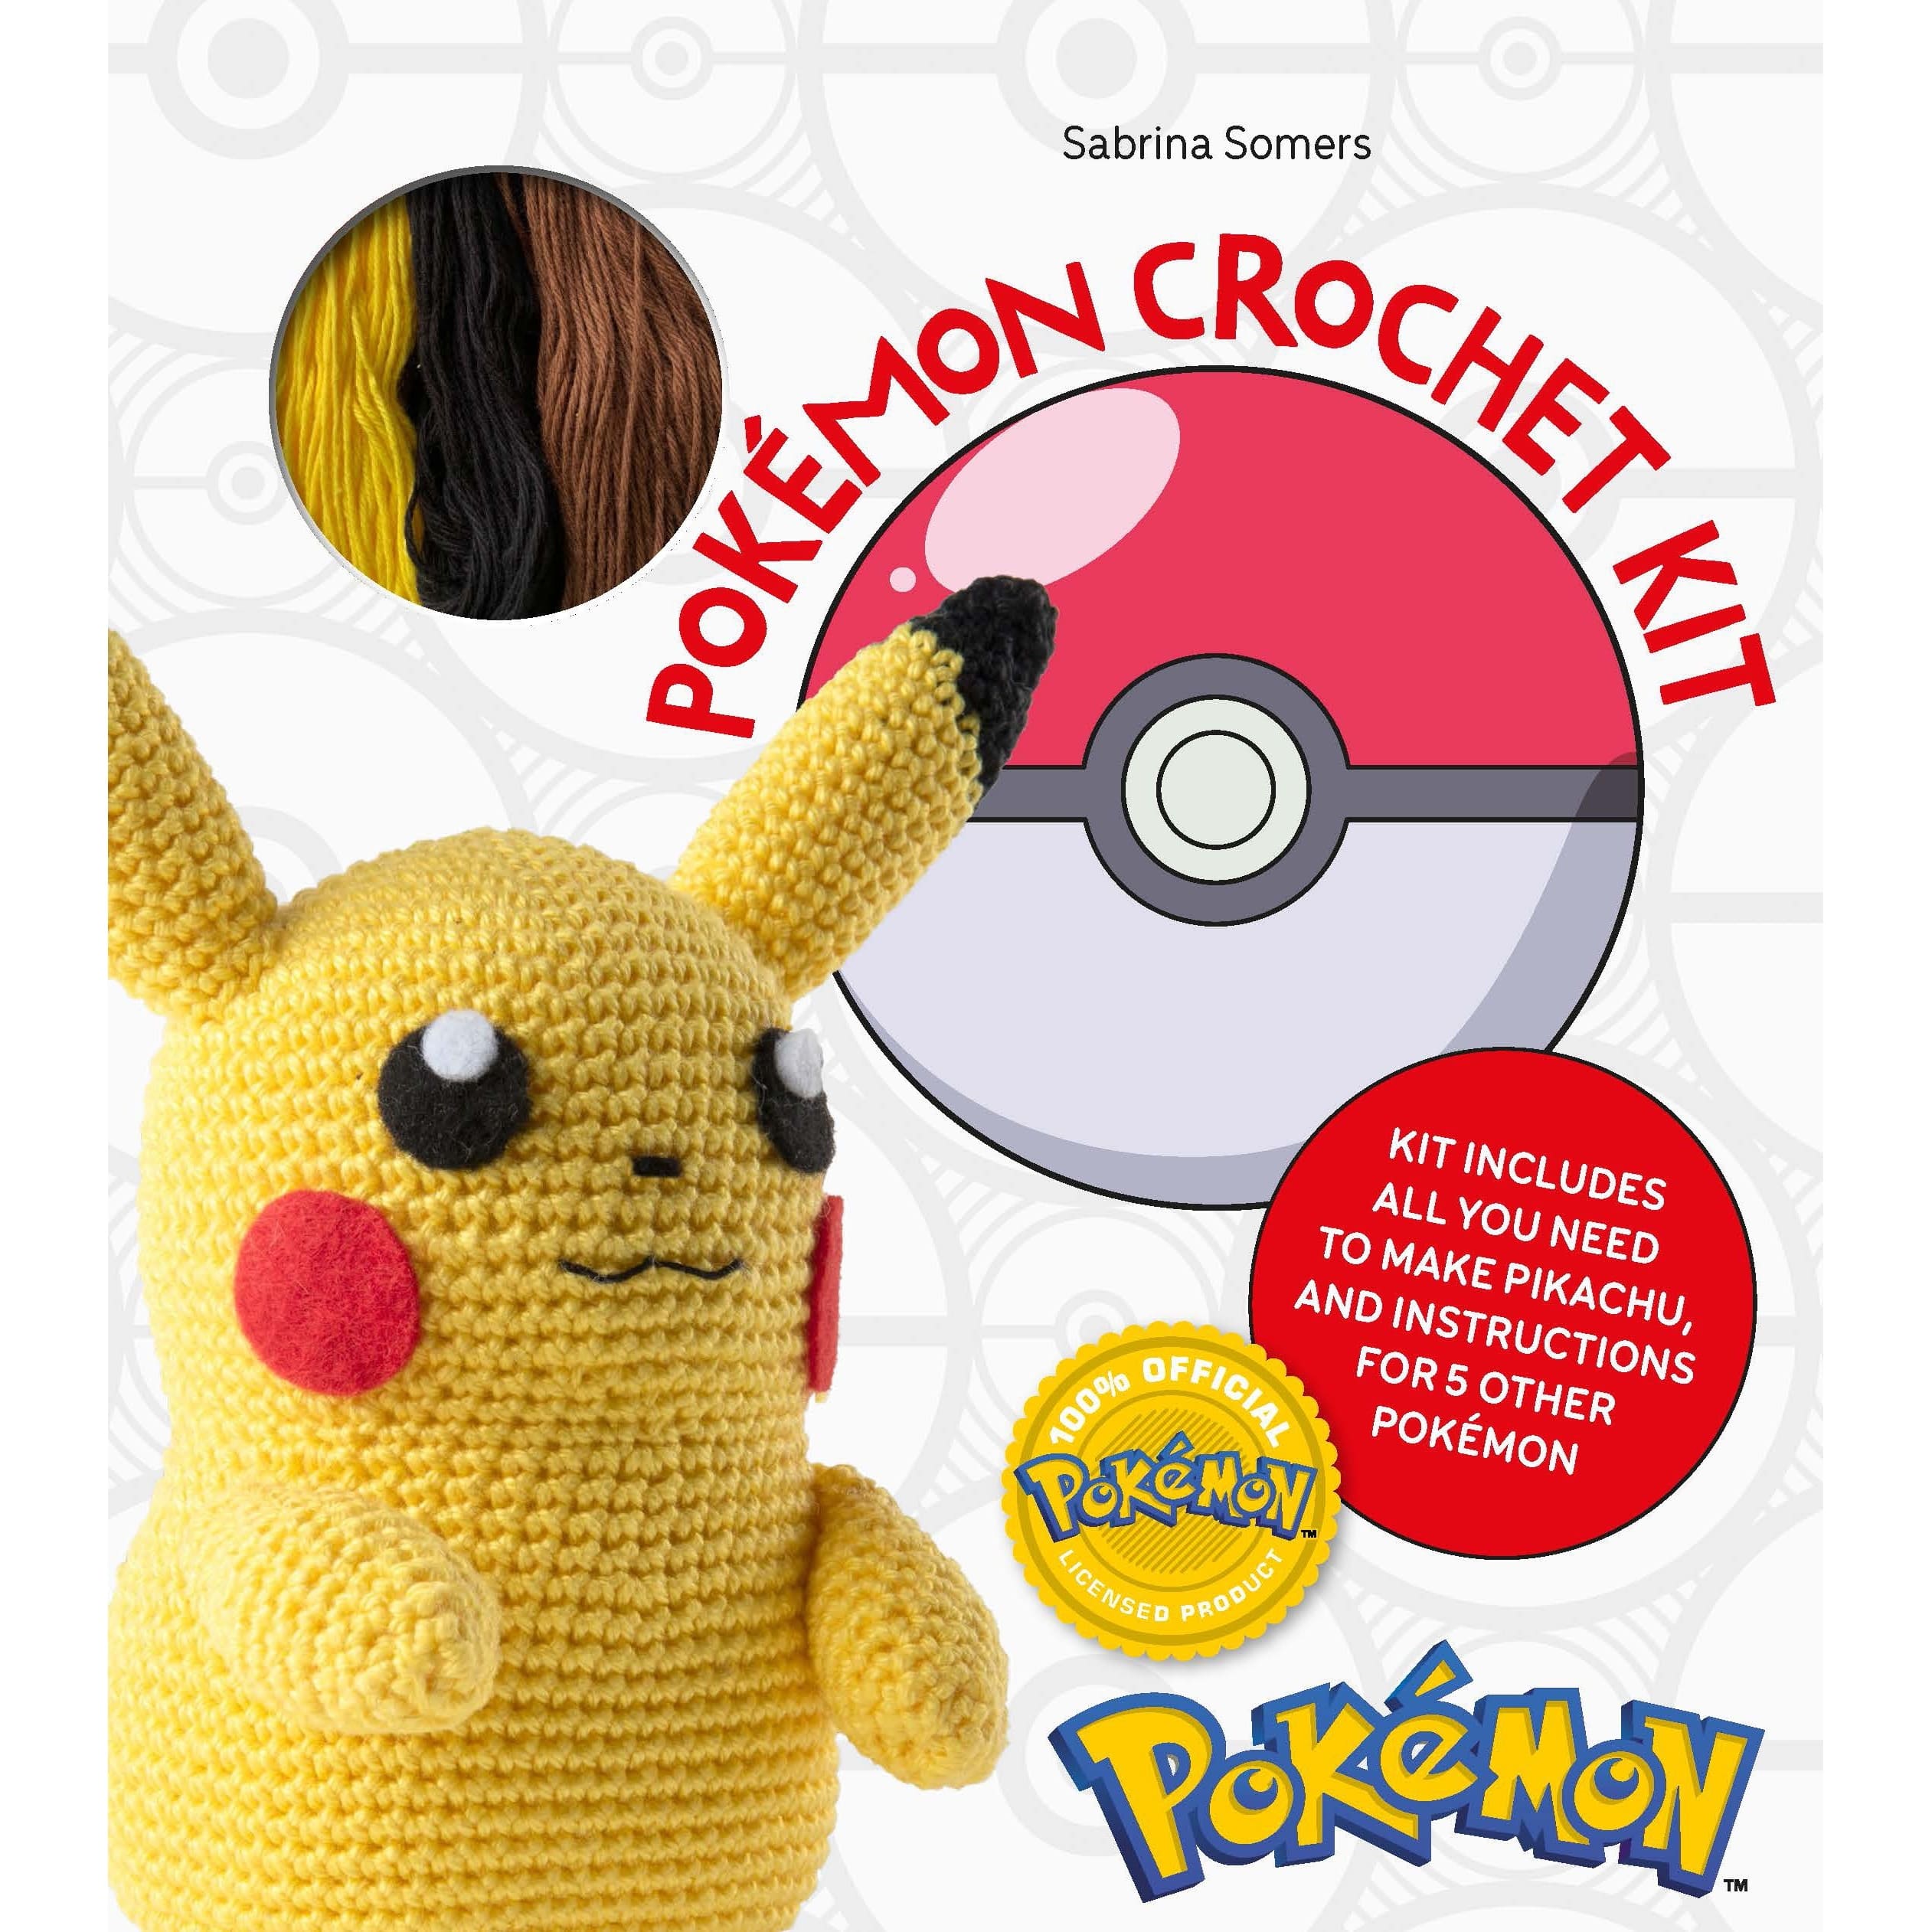 David and Charles - Pokémon Crochet Kit is OUT NOW! Get your kit today and  make your crochet Pikachu! The kit also includes patterns to make 5 other  Pokémon - Jigglypuff, Snorlax